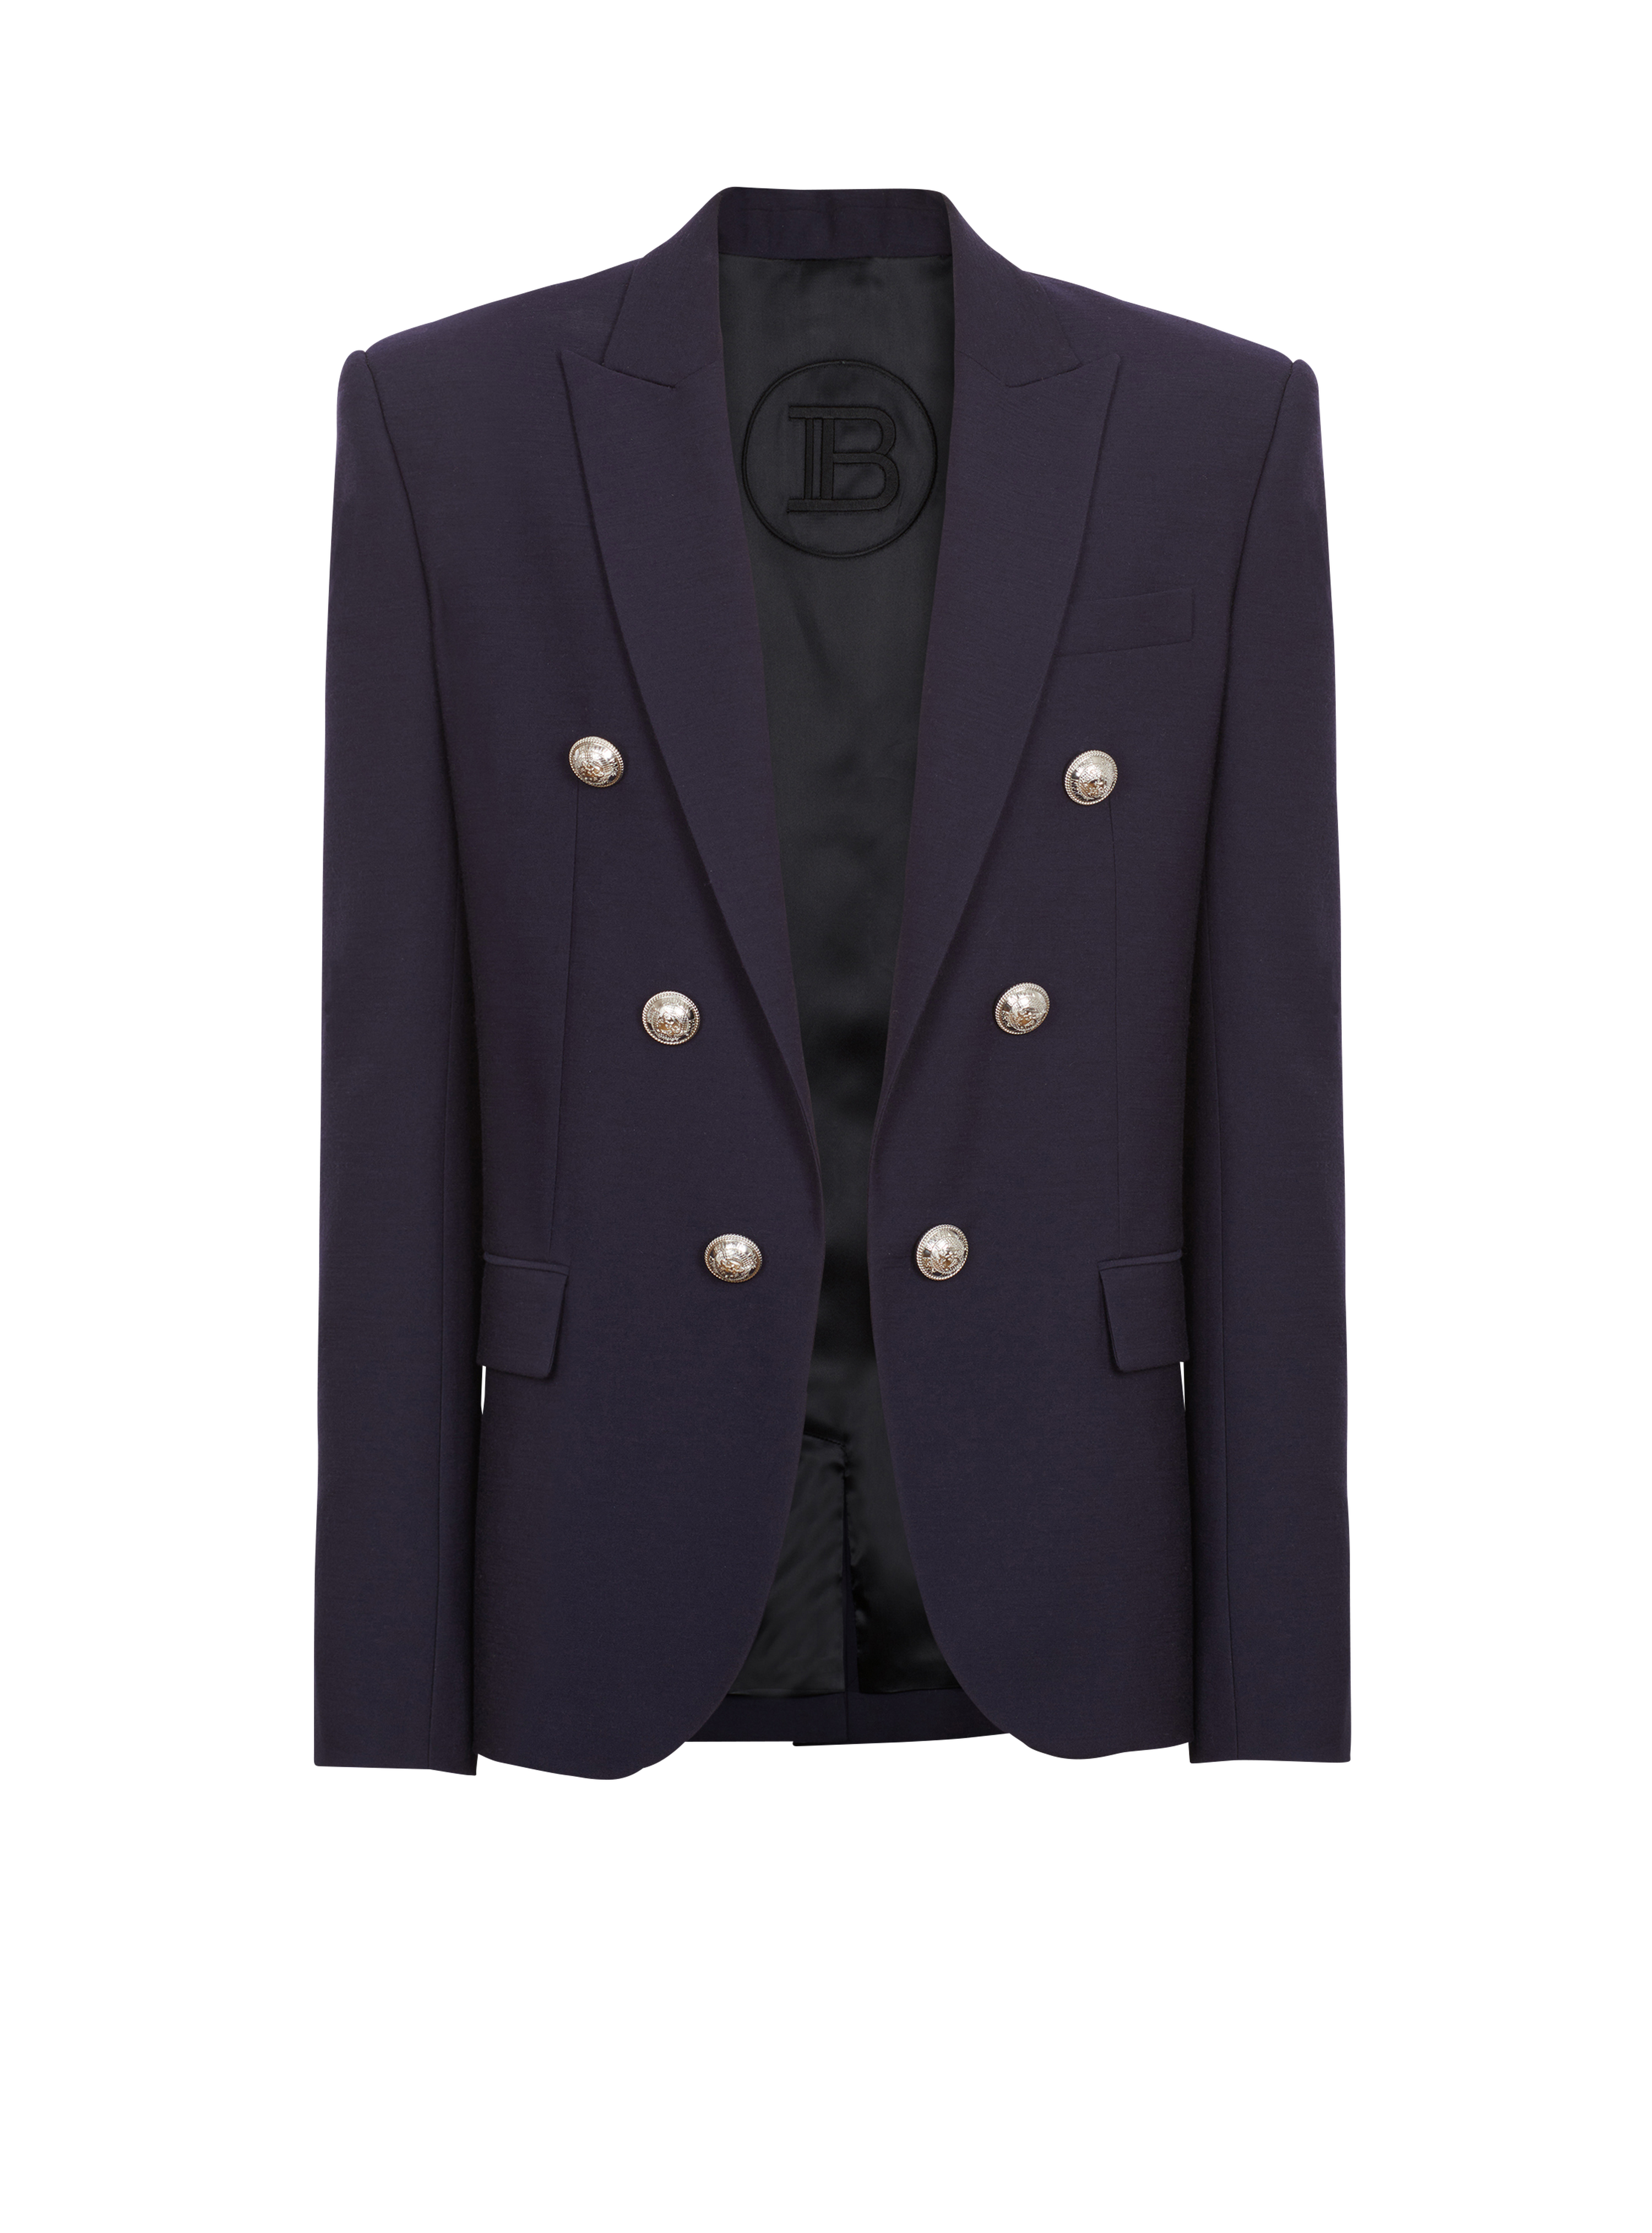 Double-breasted Jersey blazer, navy